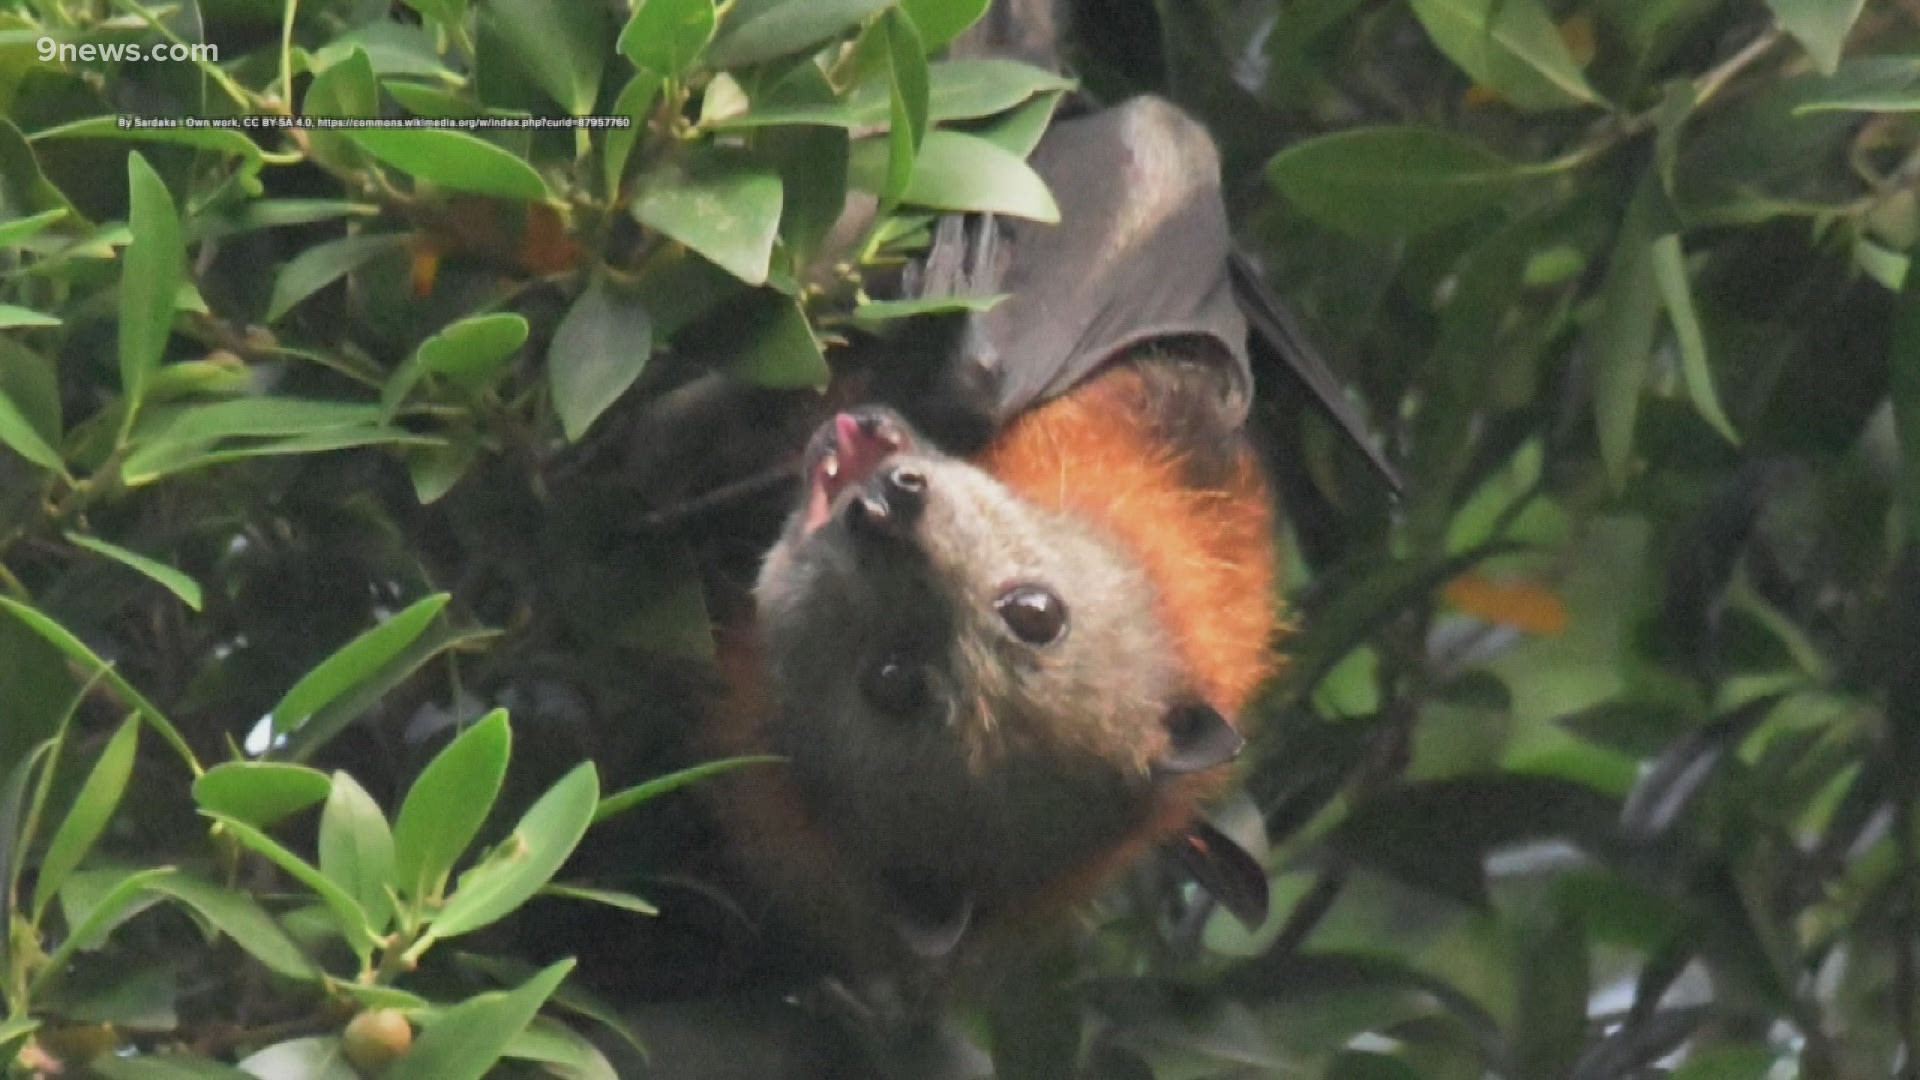 Feasting on fruit, flying foxes pollinate flowers and scatter seeds, regenerating the forests.